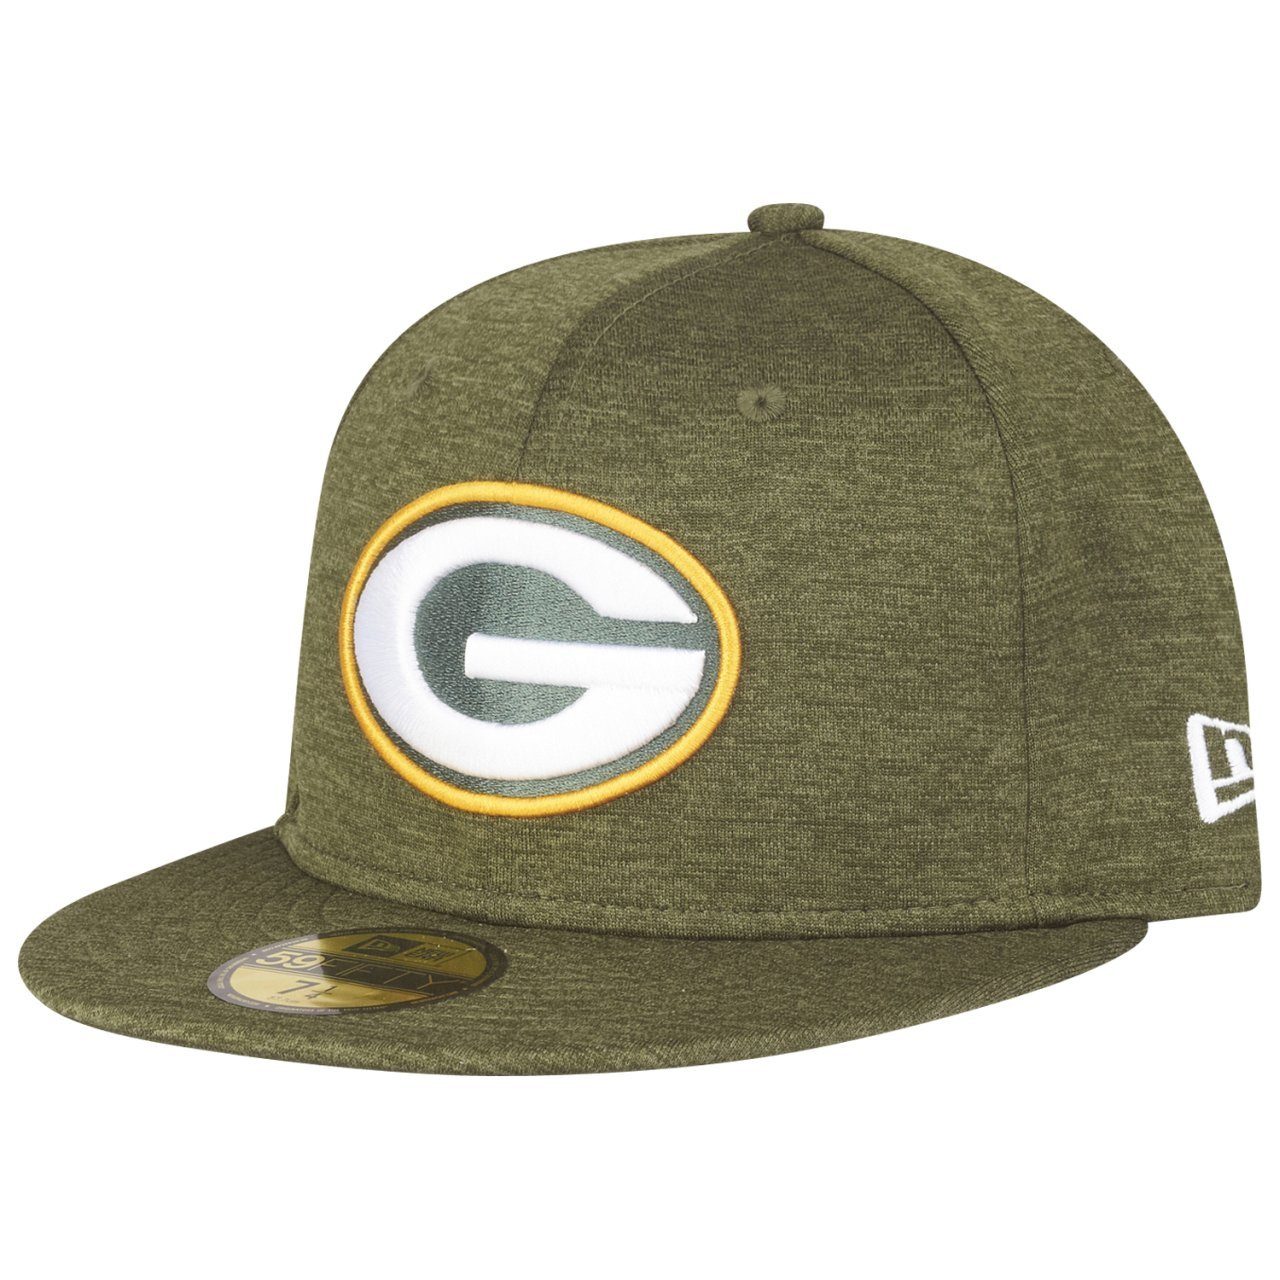 New Era Fitted Cap 59Fifty SHADOW TECH Green Bay Packers